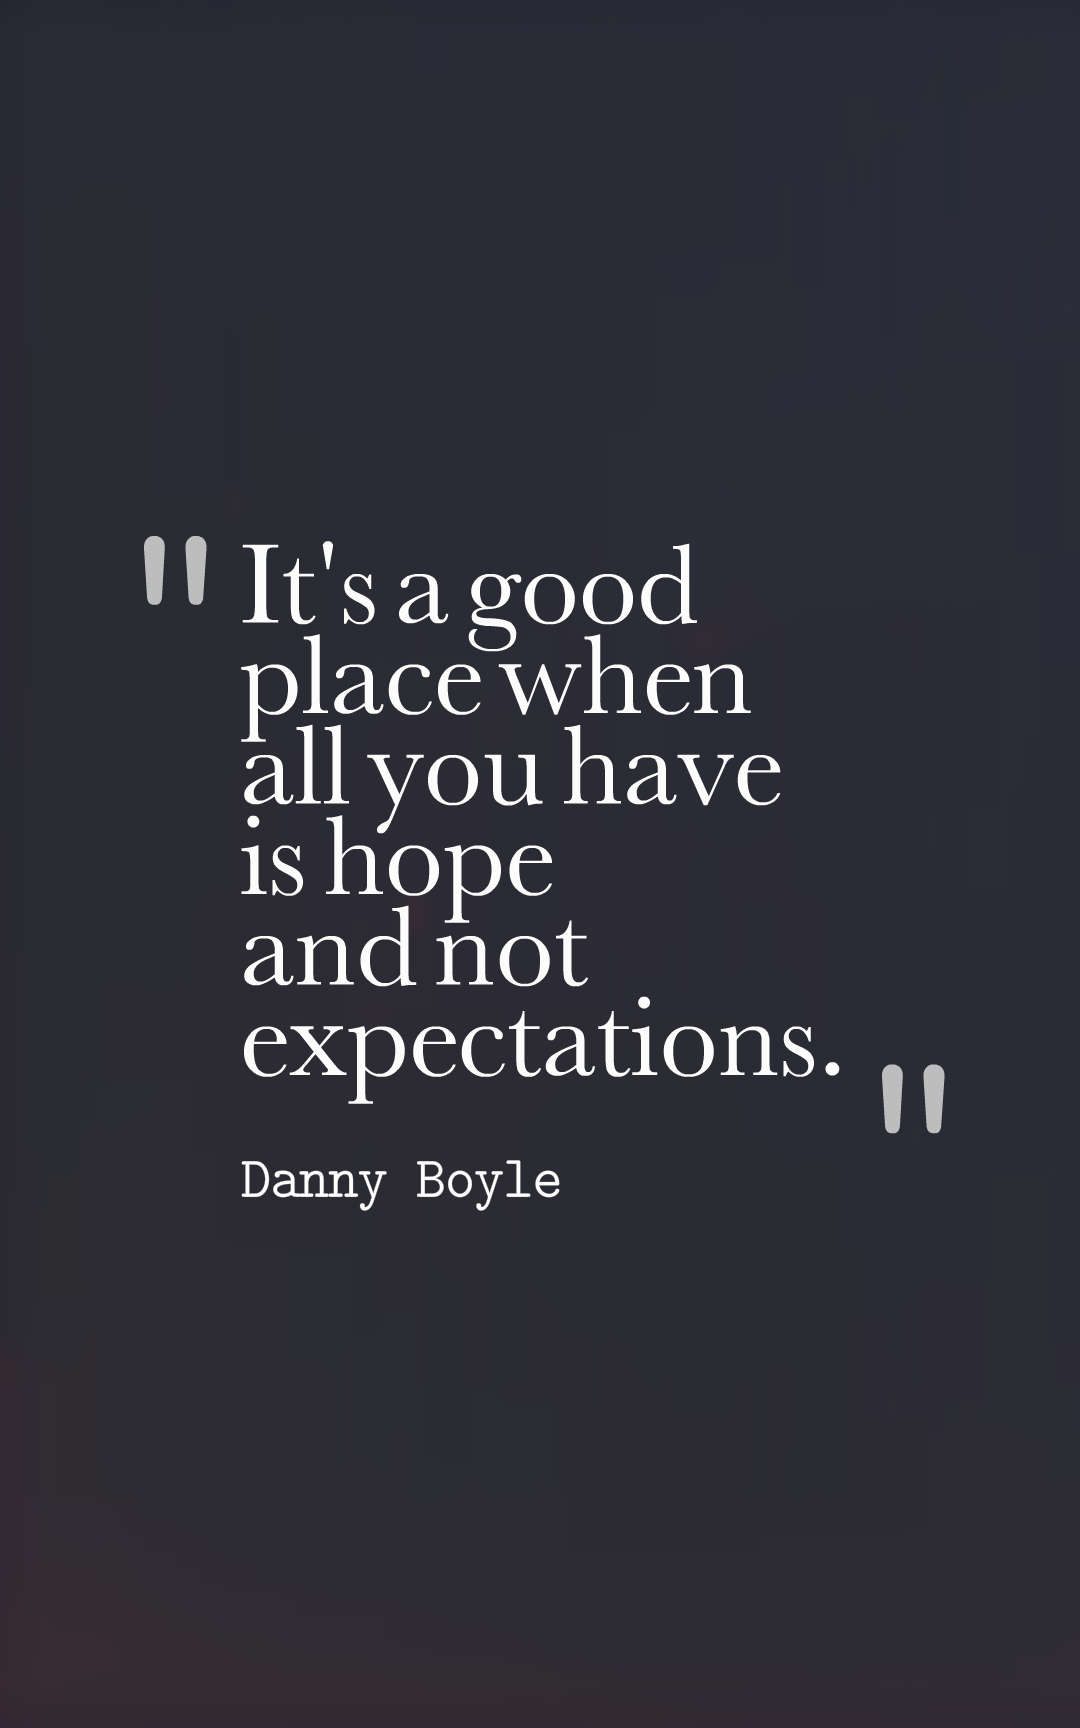 It's a good place when all you have is hope and not expectations.